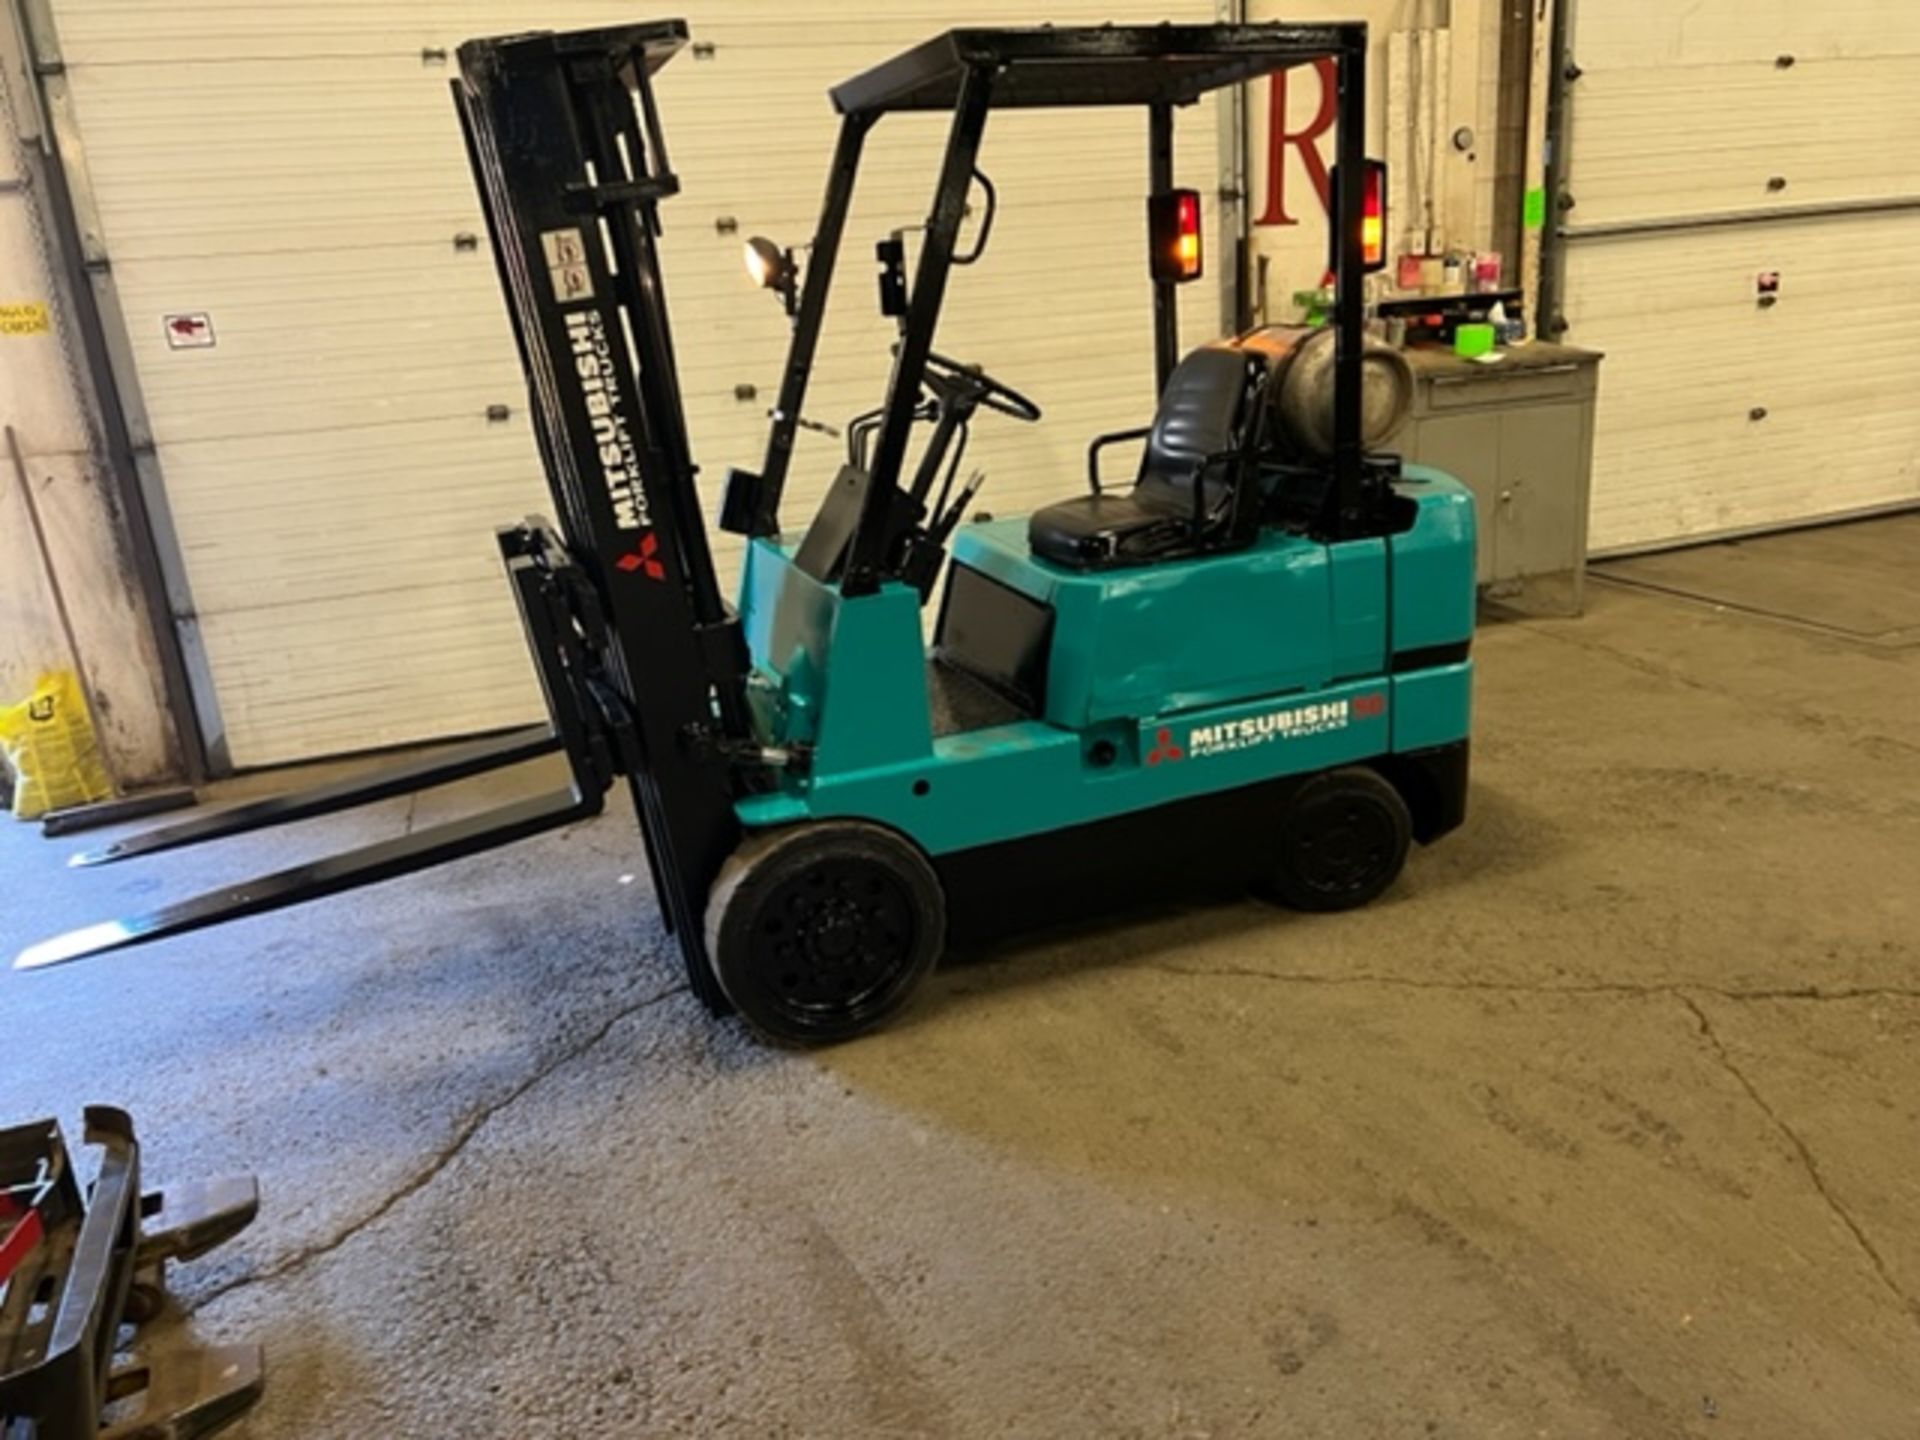 FREE CUSTOMS - NICE Mitsubishi 5,000lbs Capacity Forklift LPG (propane) with SIDESHIFT with 3-stage